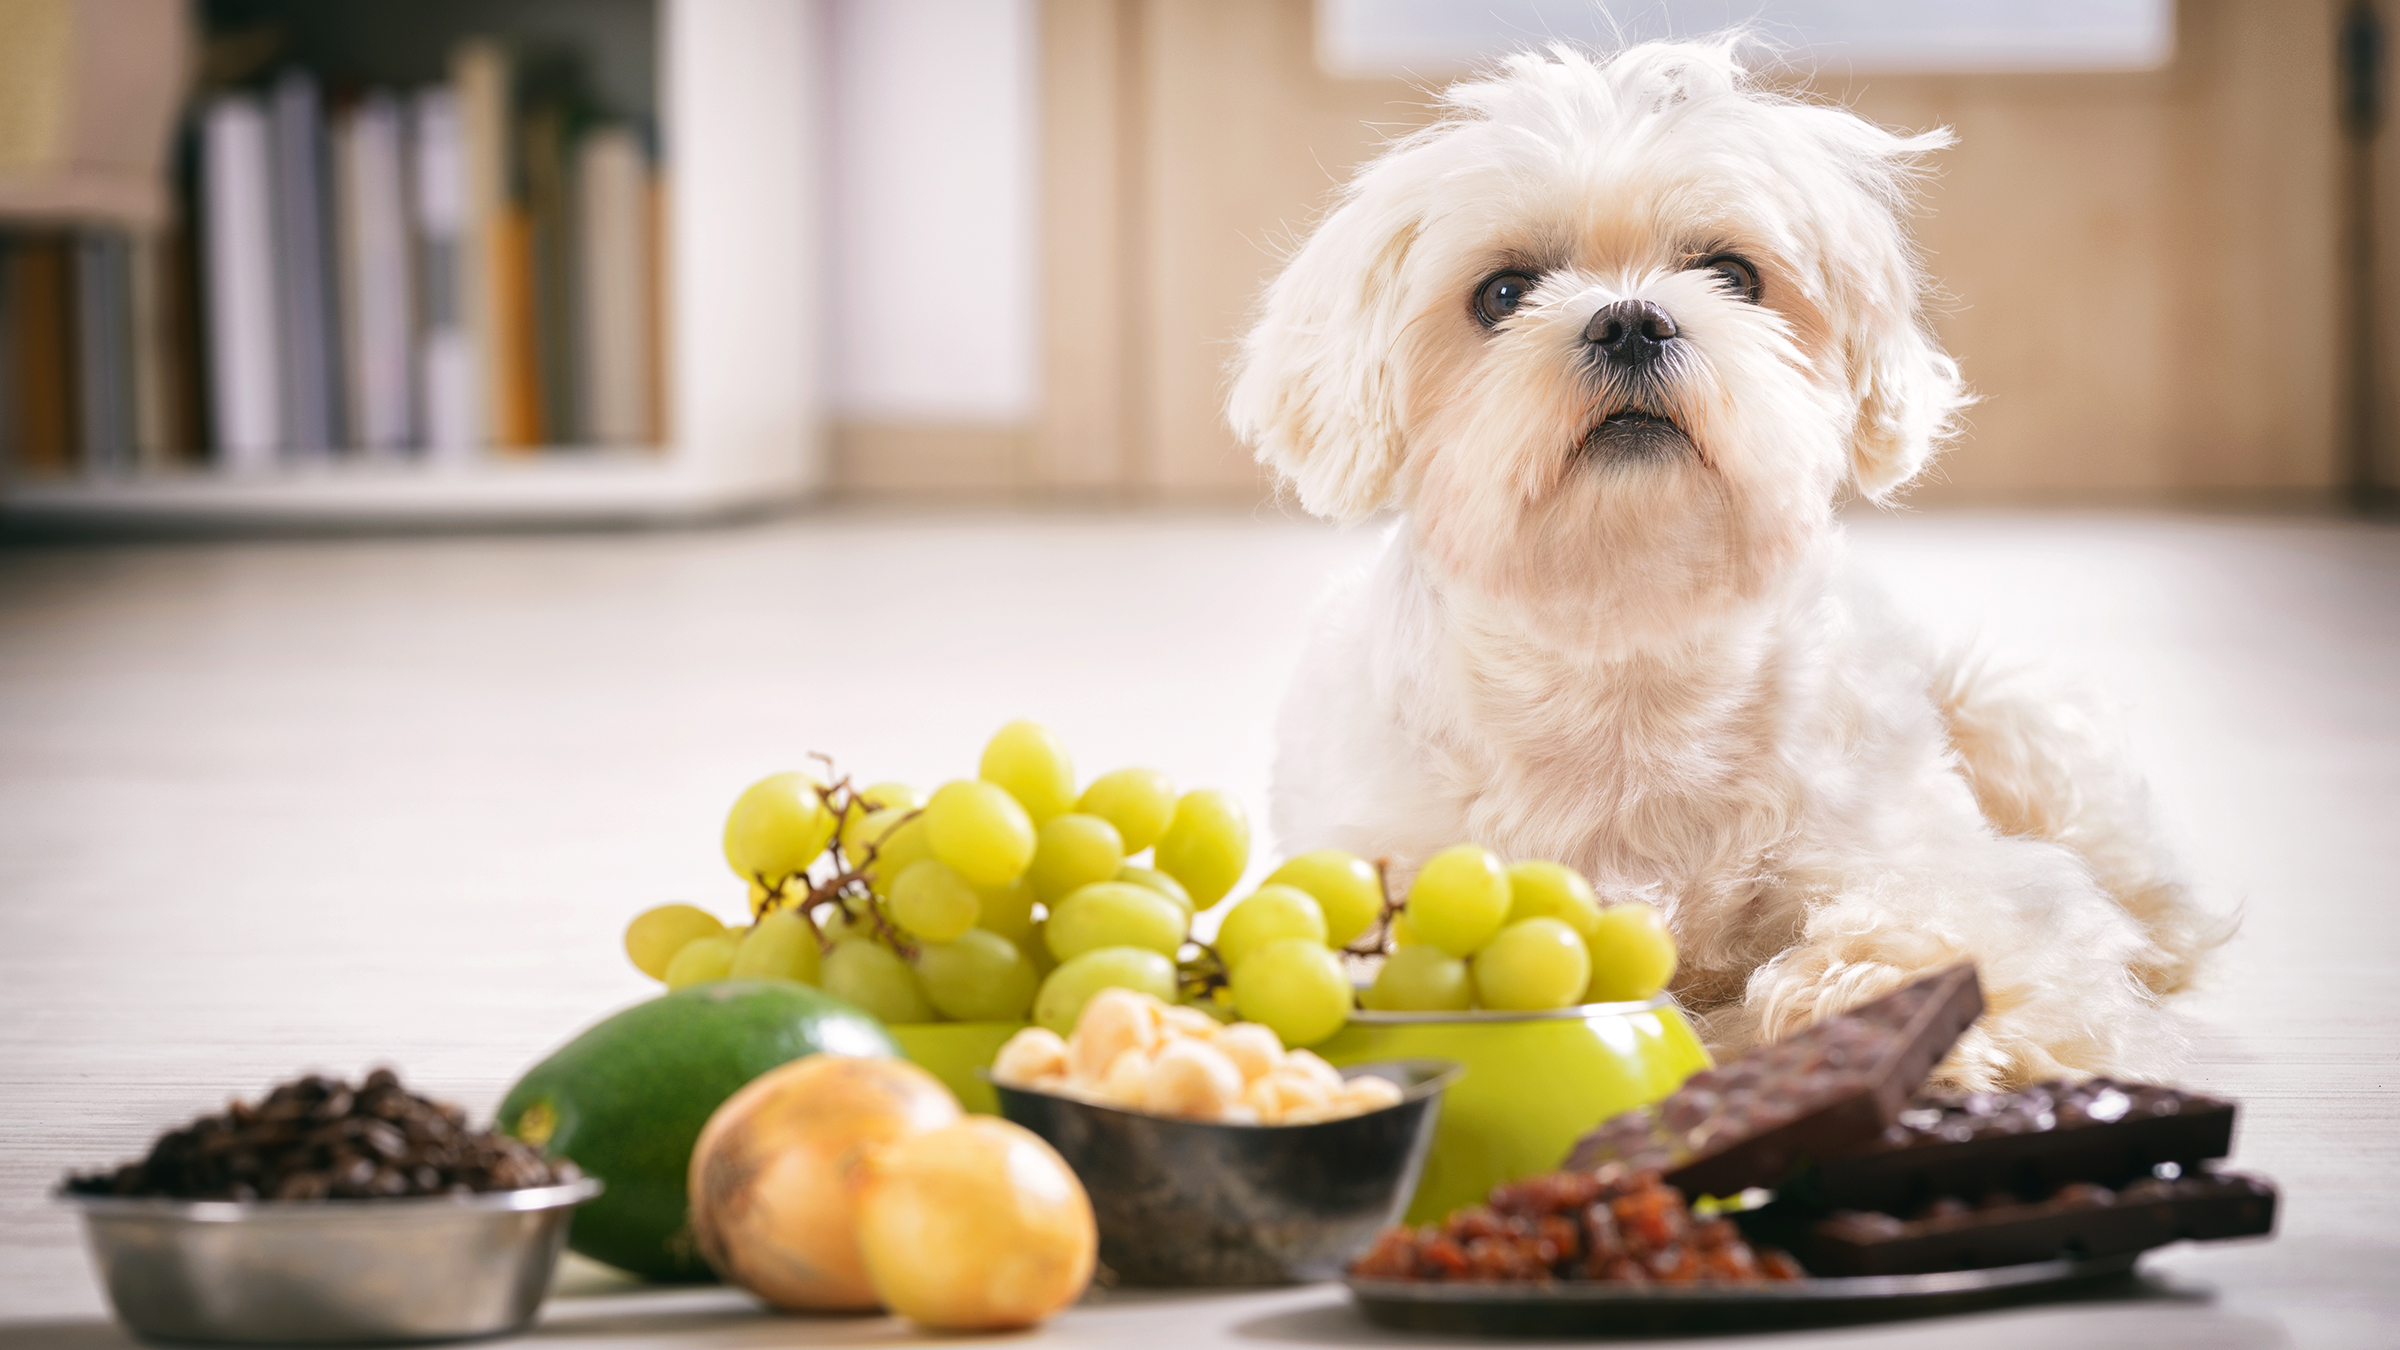 10 Human Foods that Dogs Can and Cannot Eat